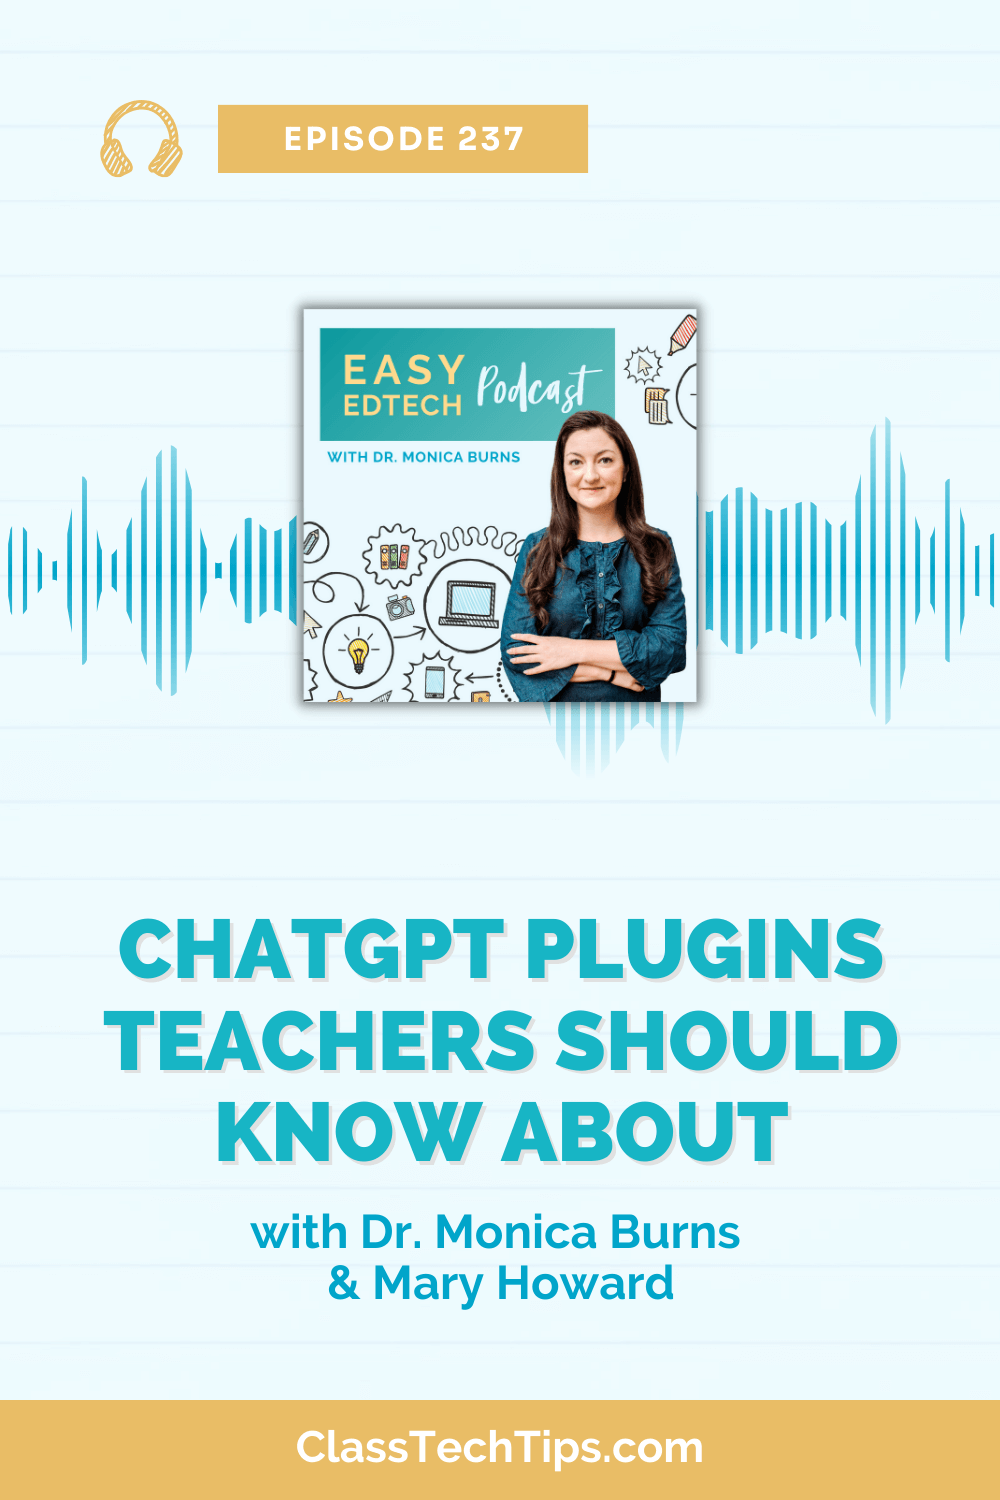 Podcast logo displayed for conversation discussing the role of ChatGPT plugins in enhancing teaching and learning.